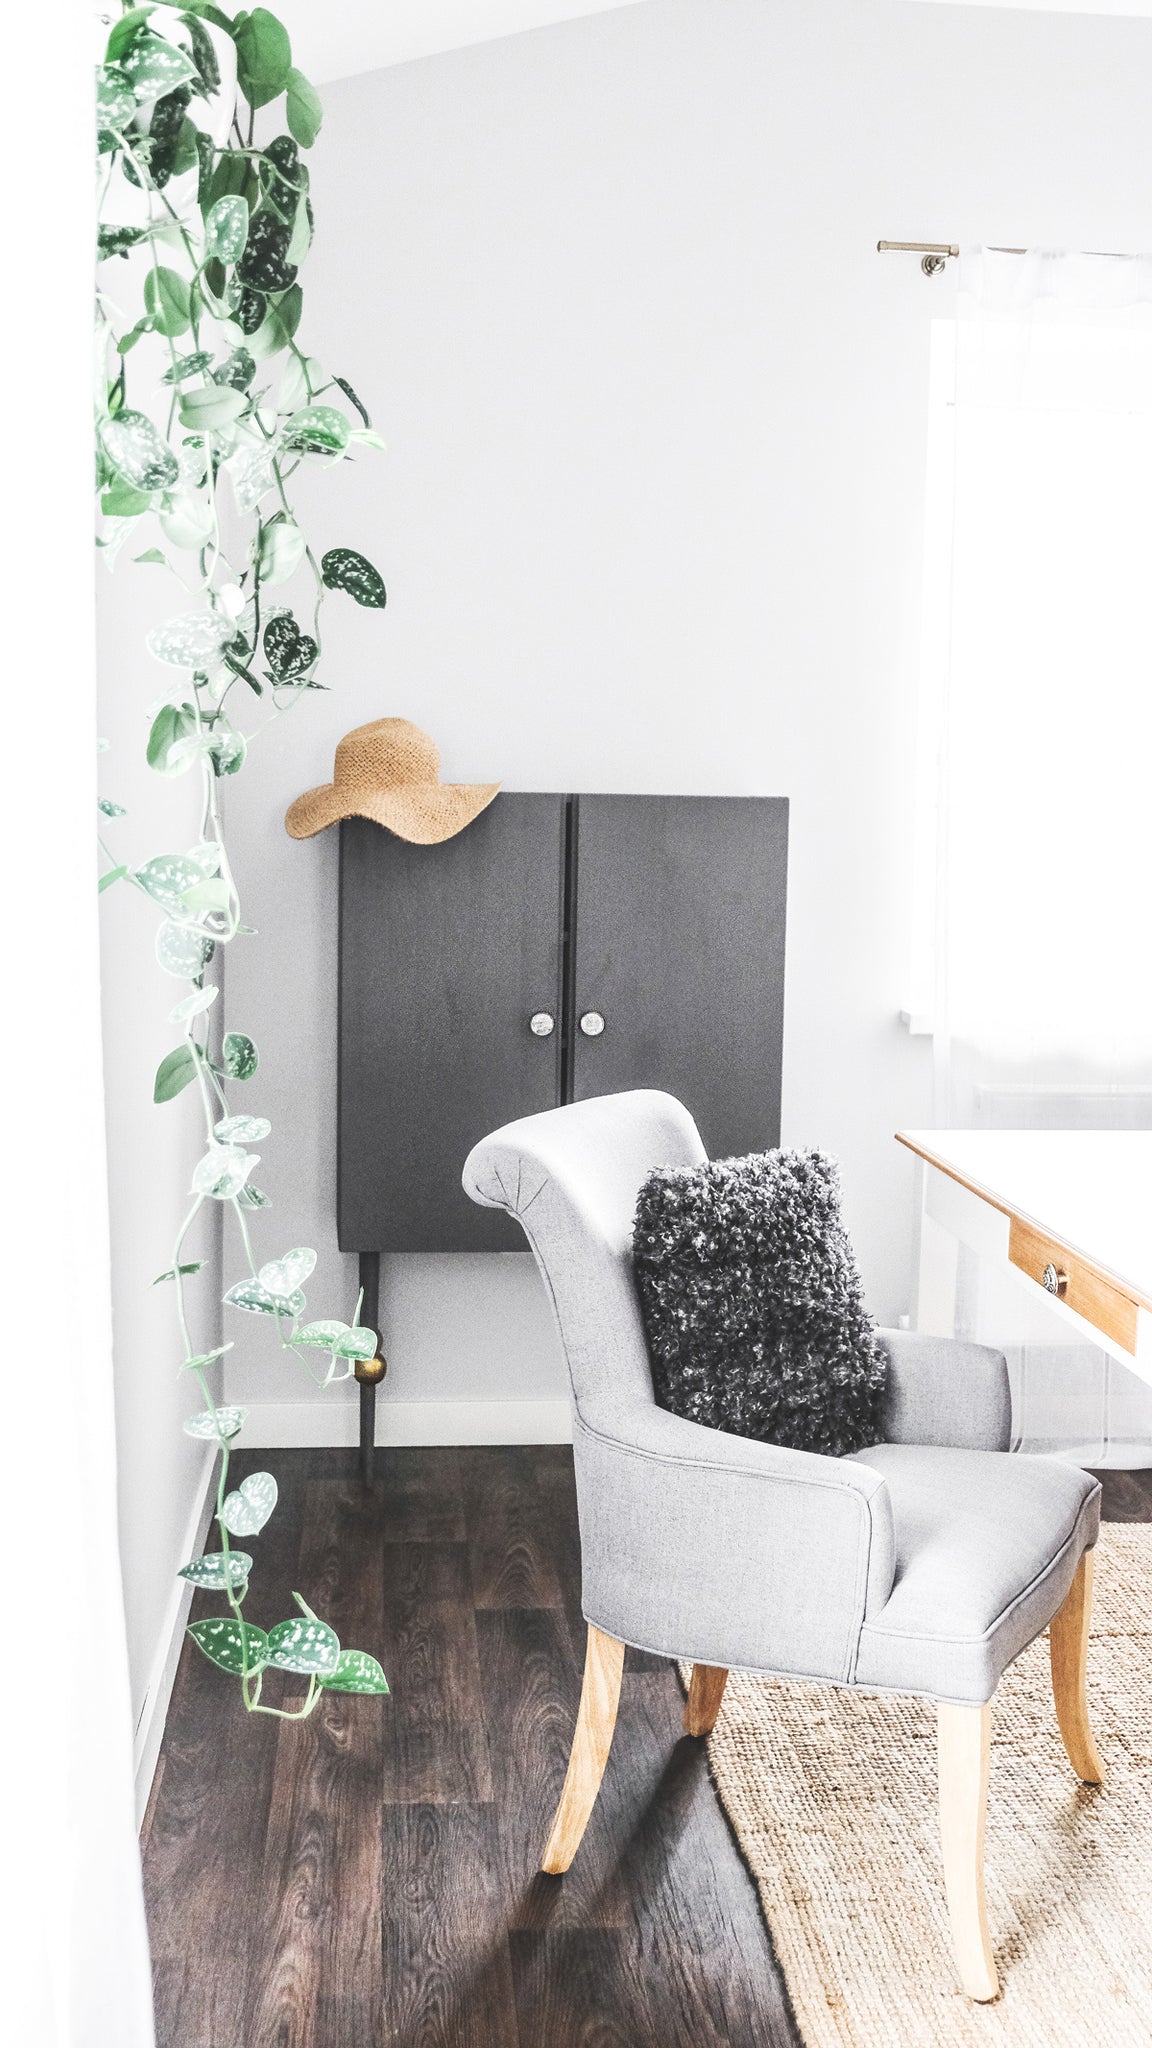 Bohemian workspace with grey armchair and rattan interior decor